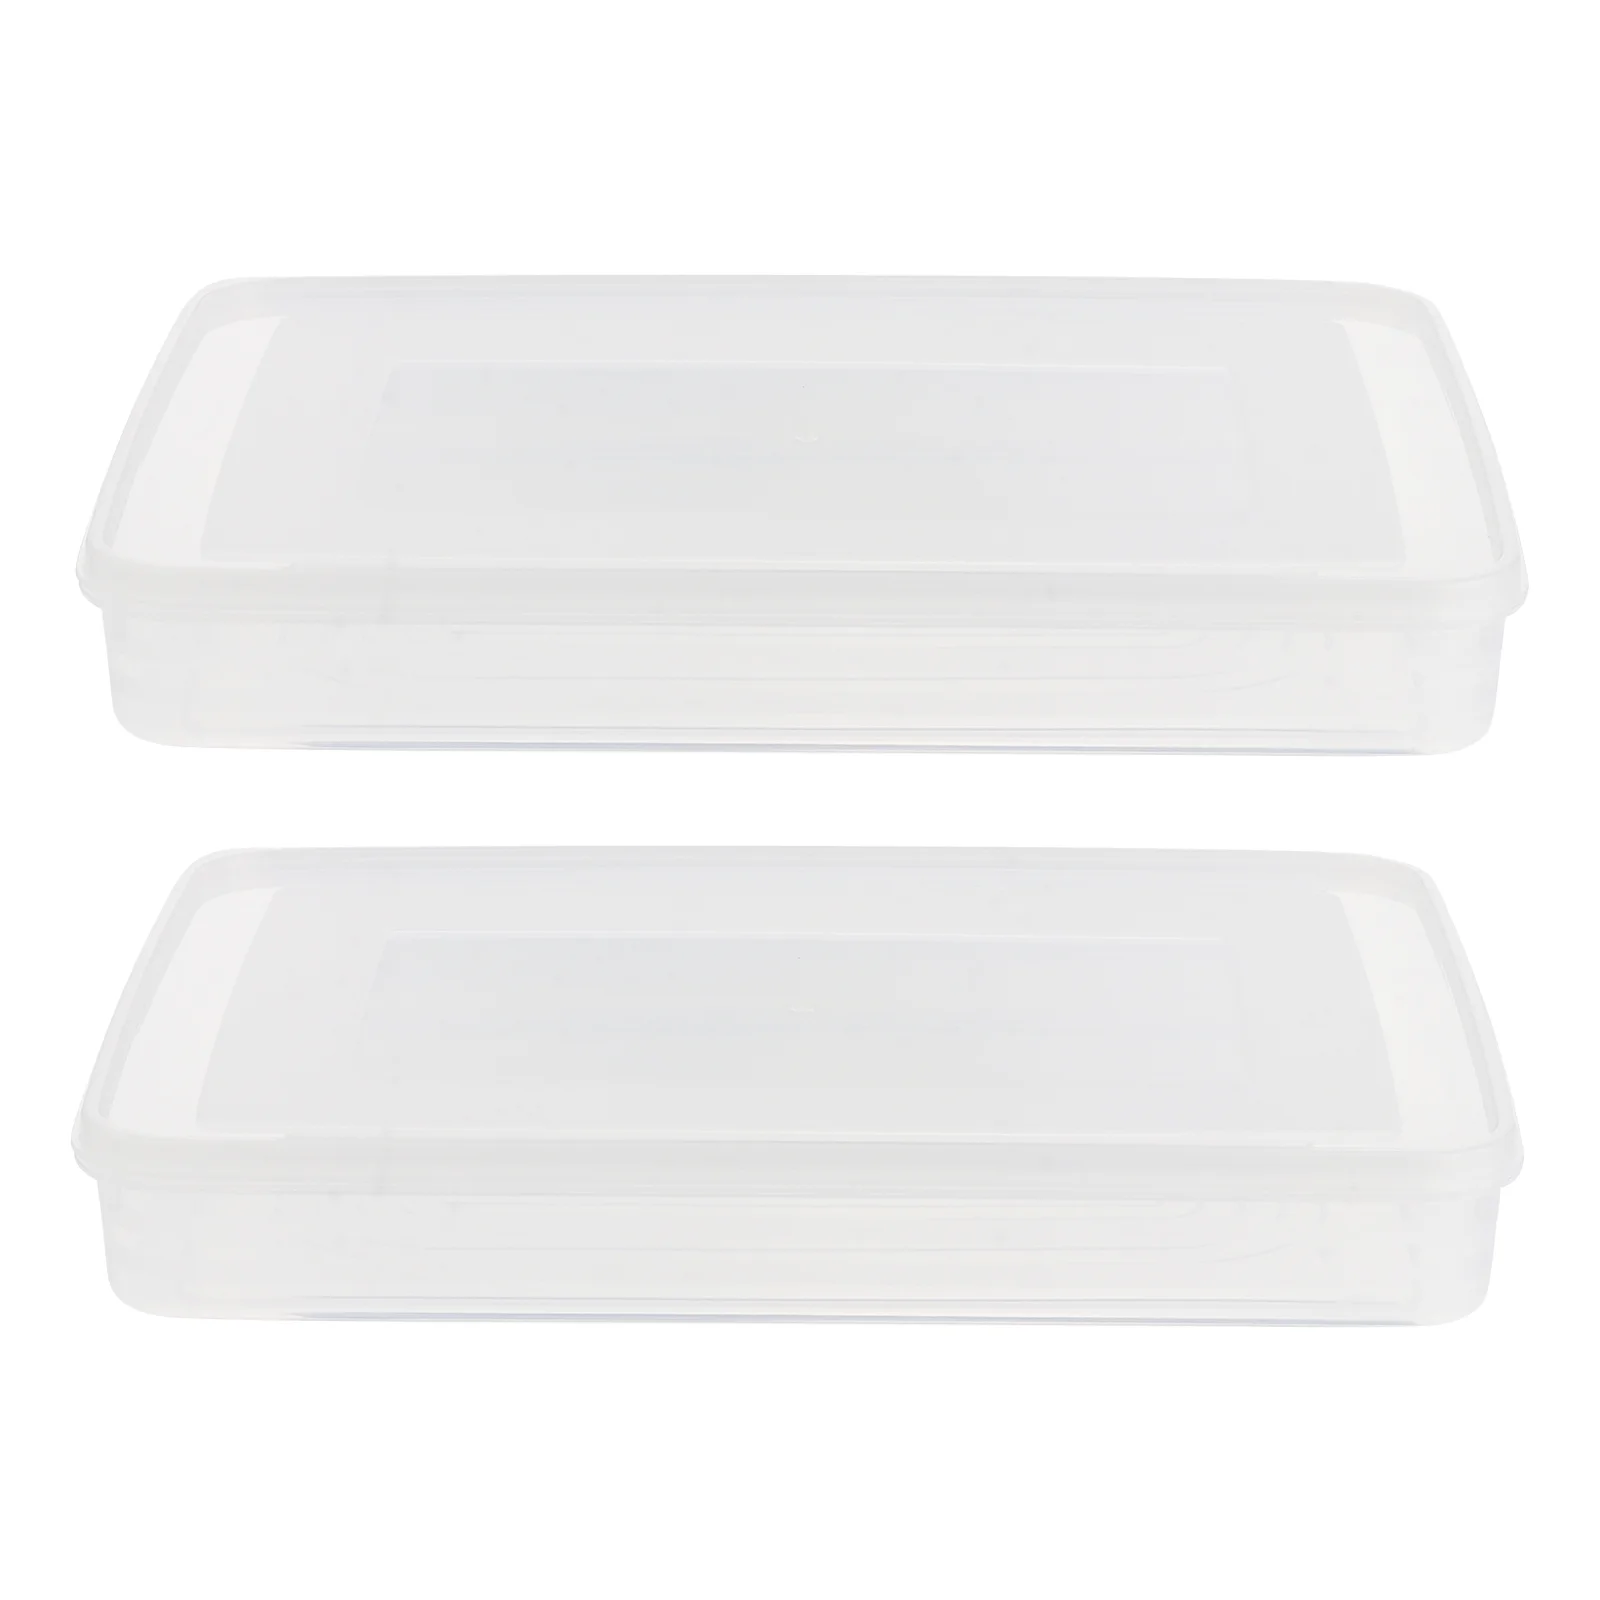 

2pcs Storage Container With Lid Storage Container Sealed Leak- proof Container Fruit Dumplings Storage Container